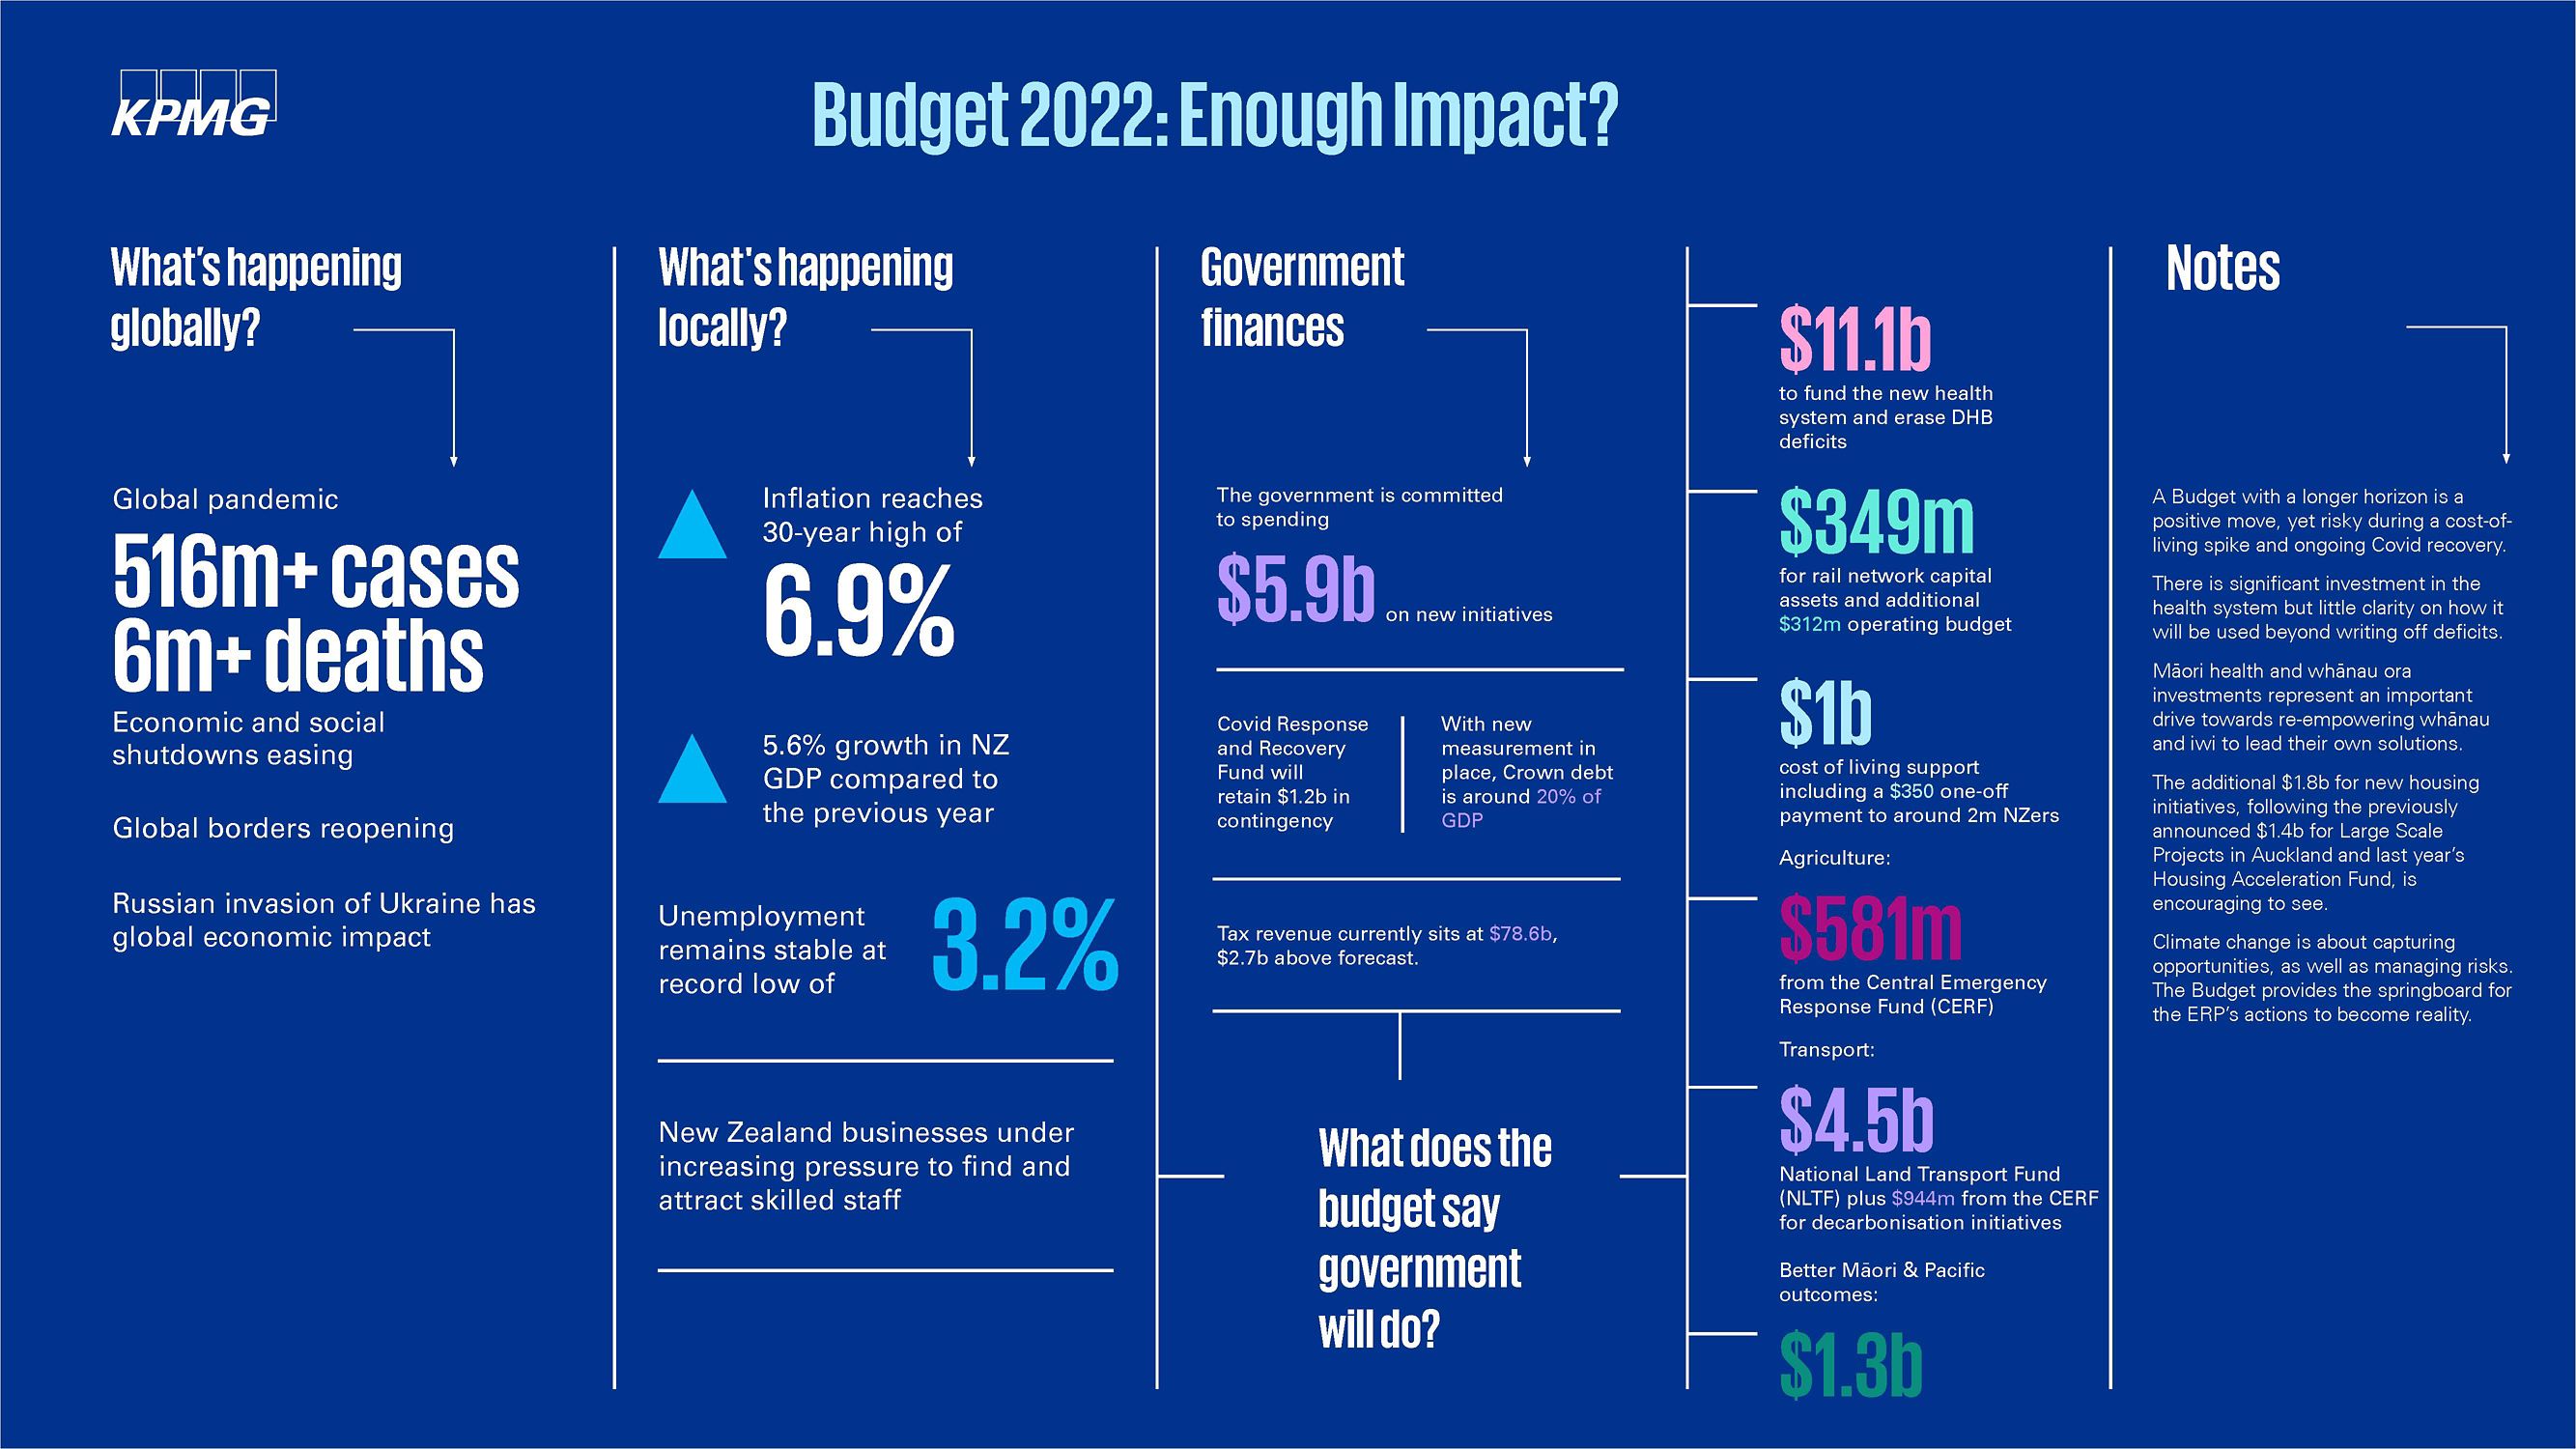 Budget 2022 at a glance